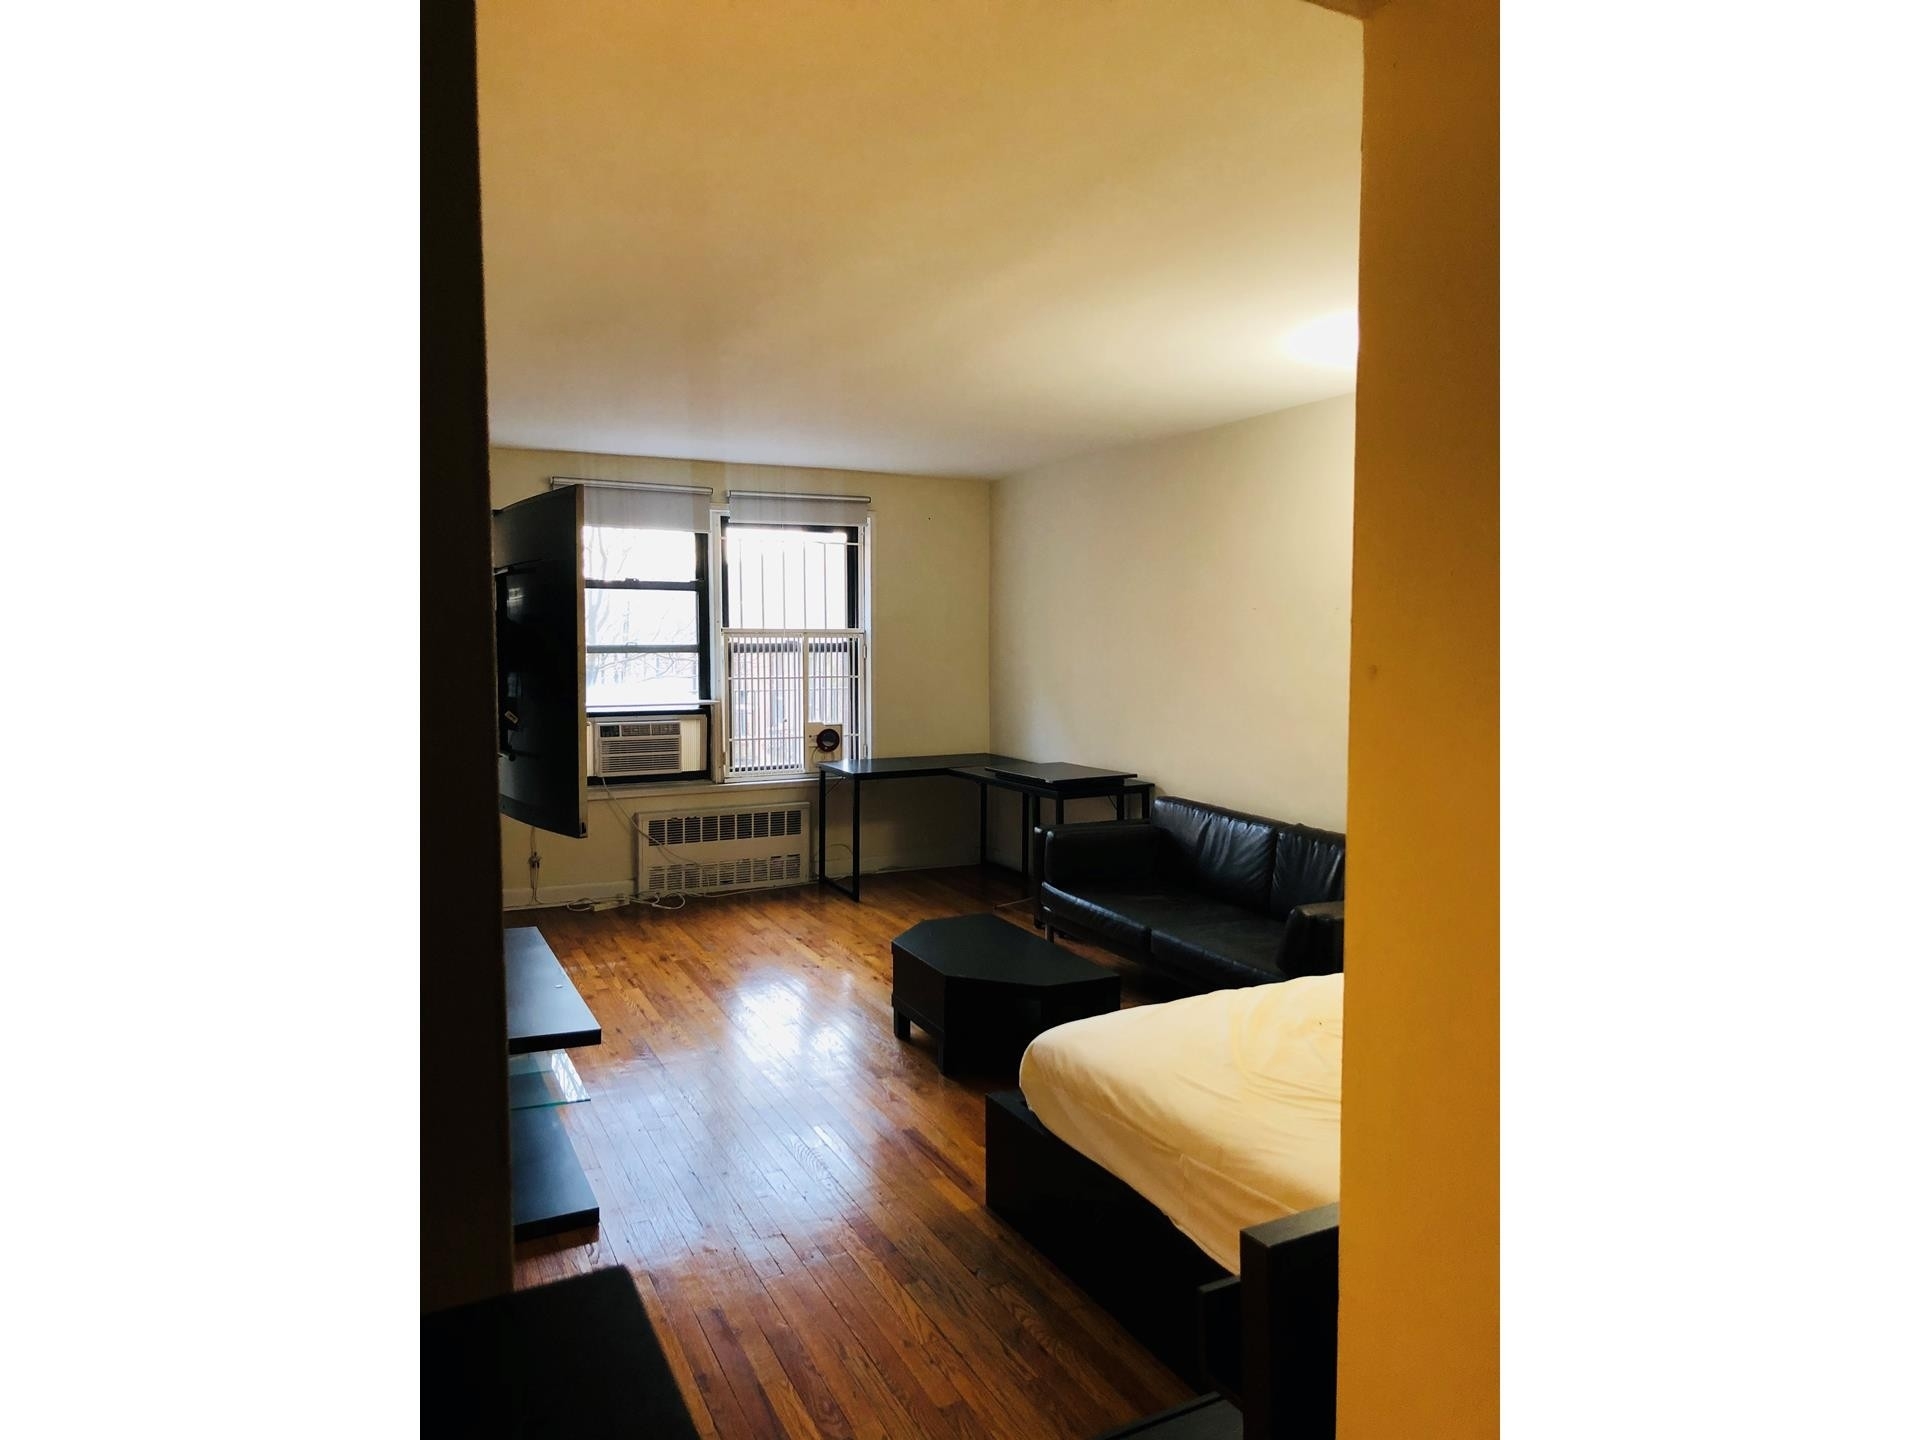 Co-op Properties for Sale at 3400 SNYDER AVE, 4D East Flatbush, Brooklyn, NY 11203